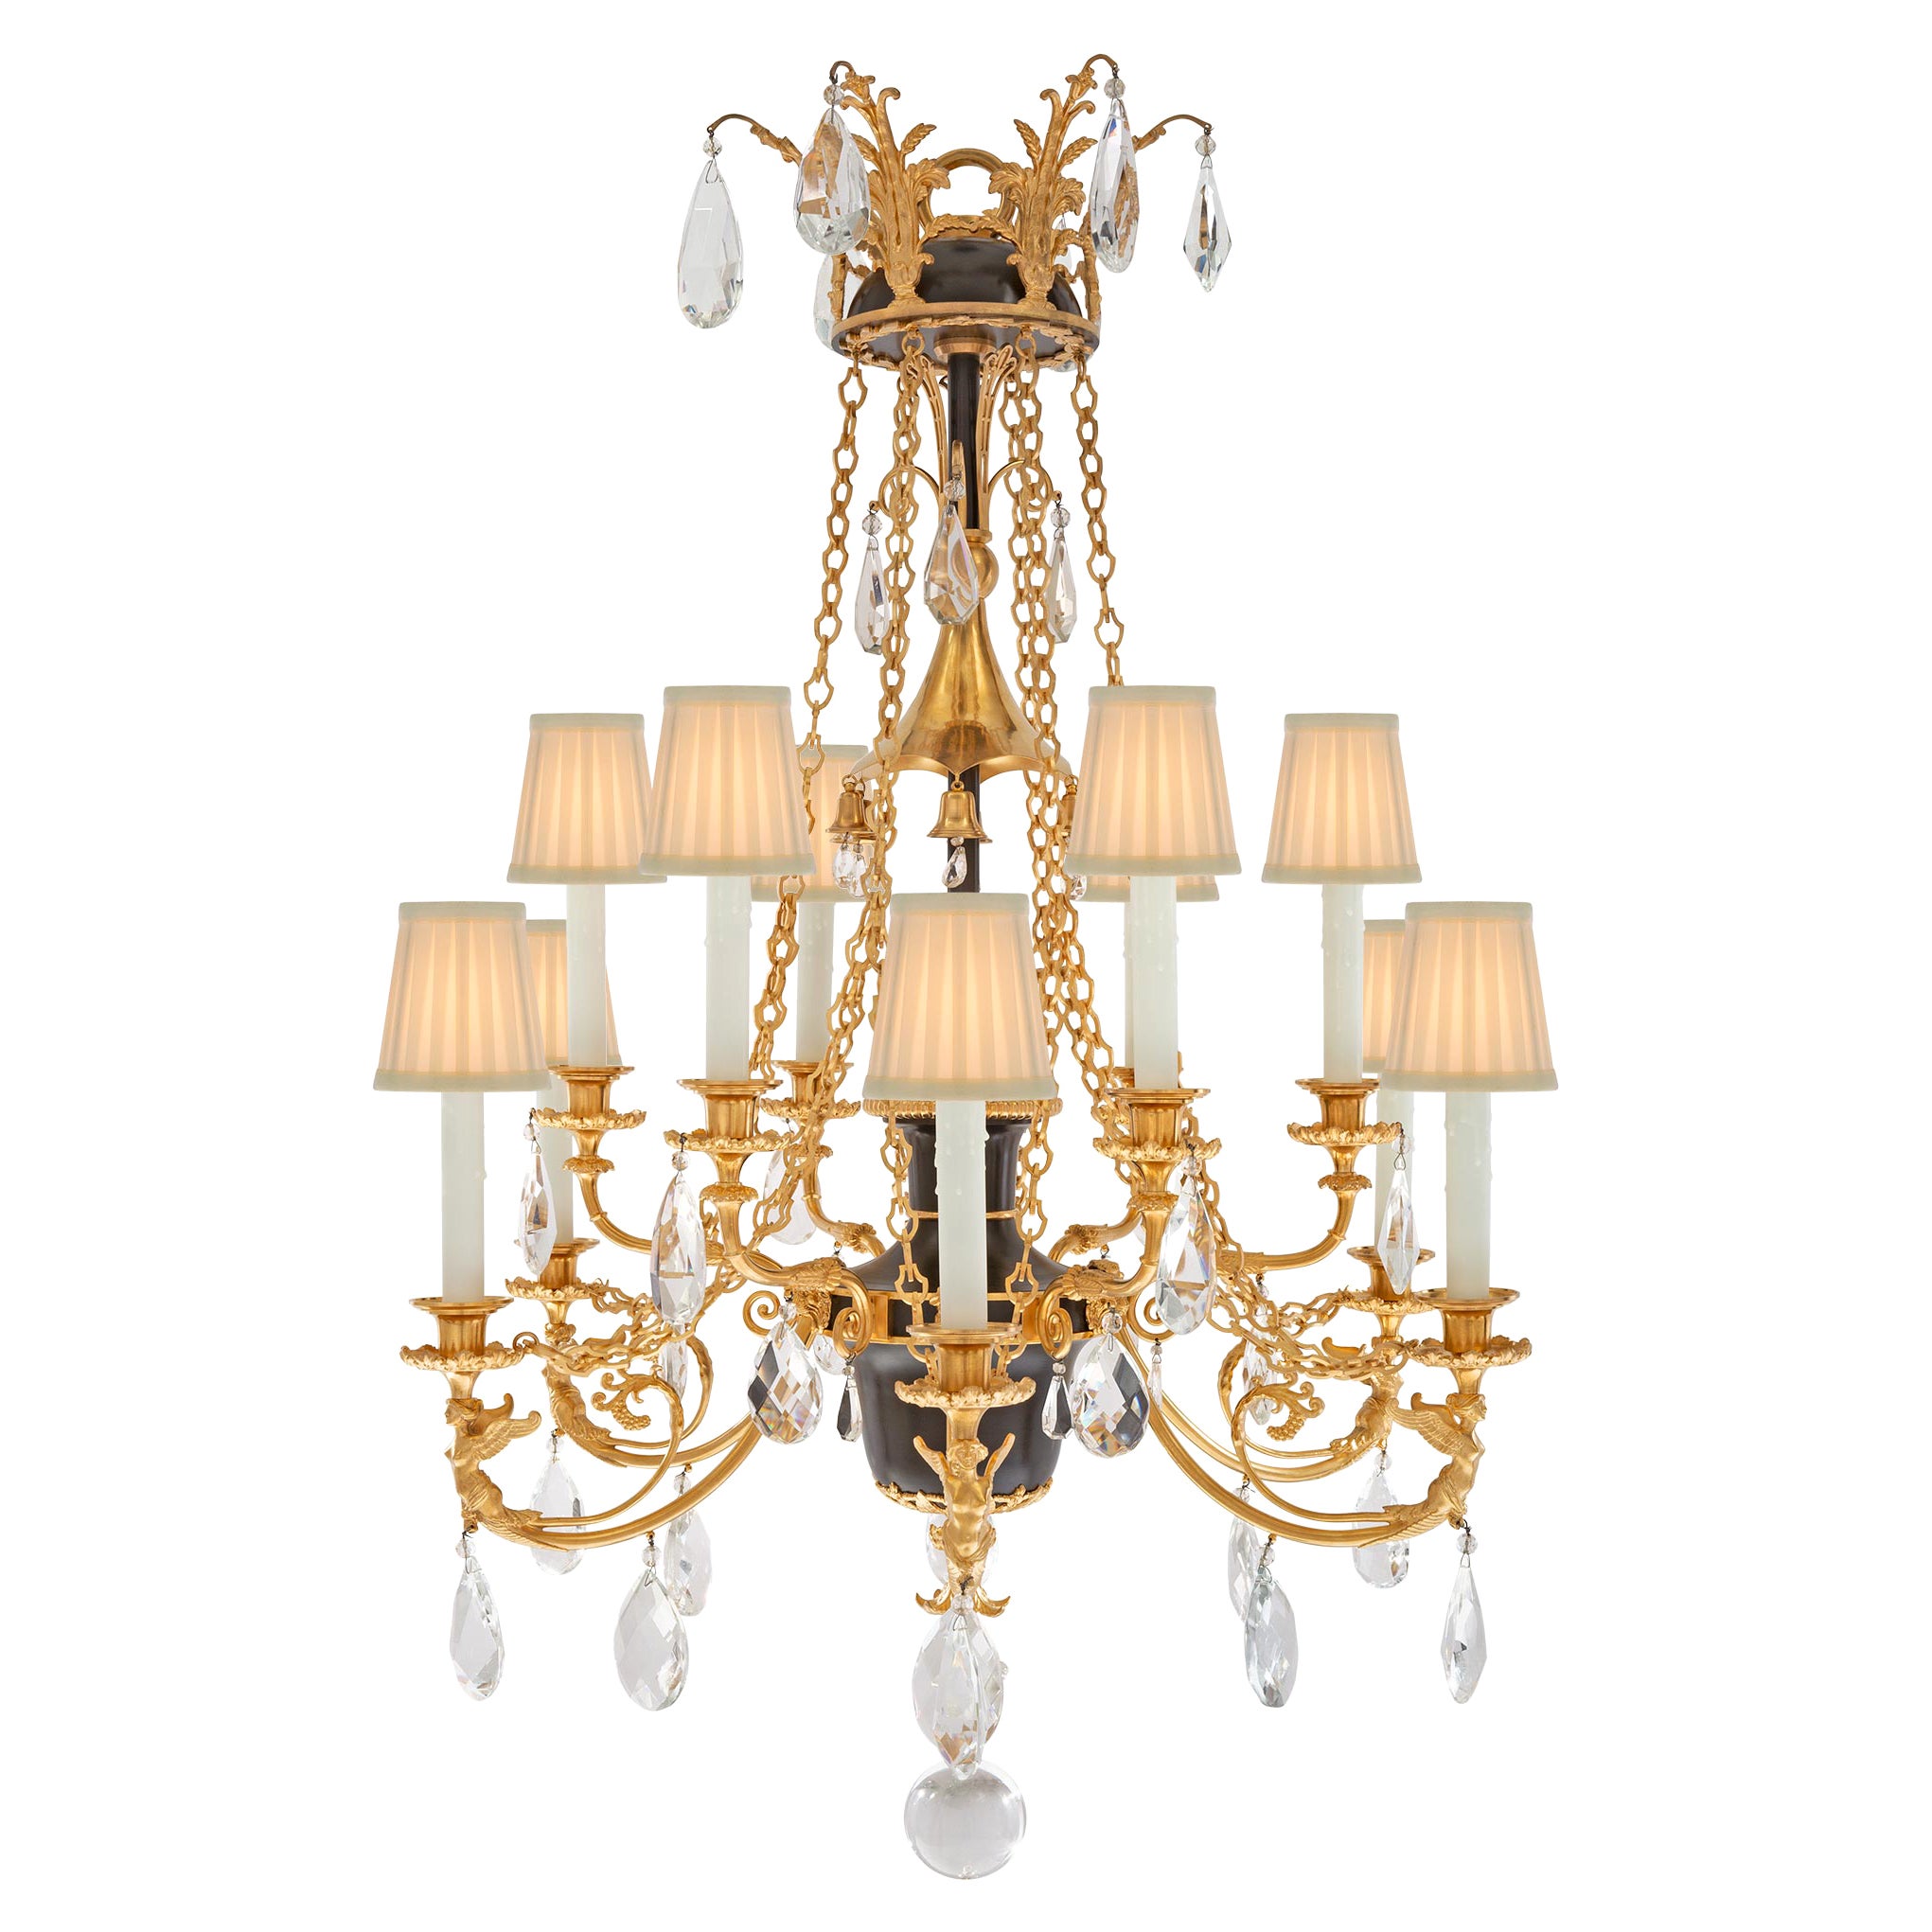 Russian 19th Century Empire St. Patinated Bronze, Crystal, and Ormolu Chandelier